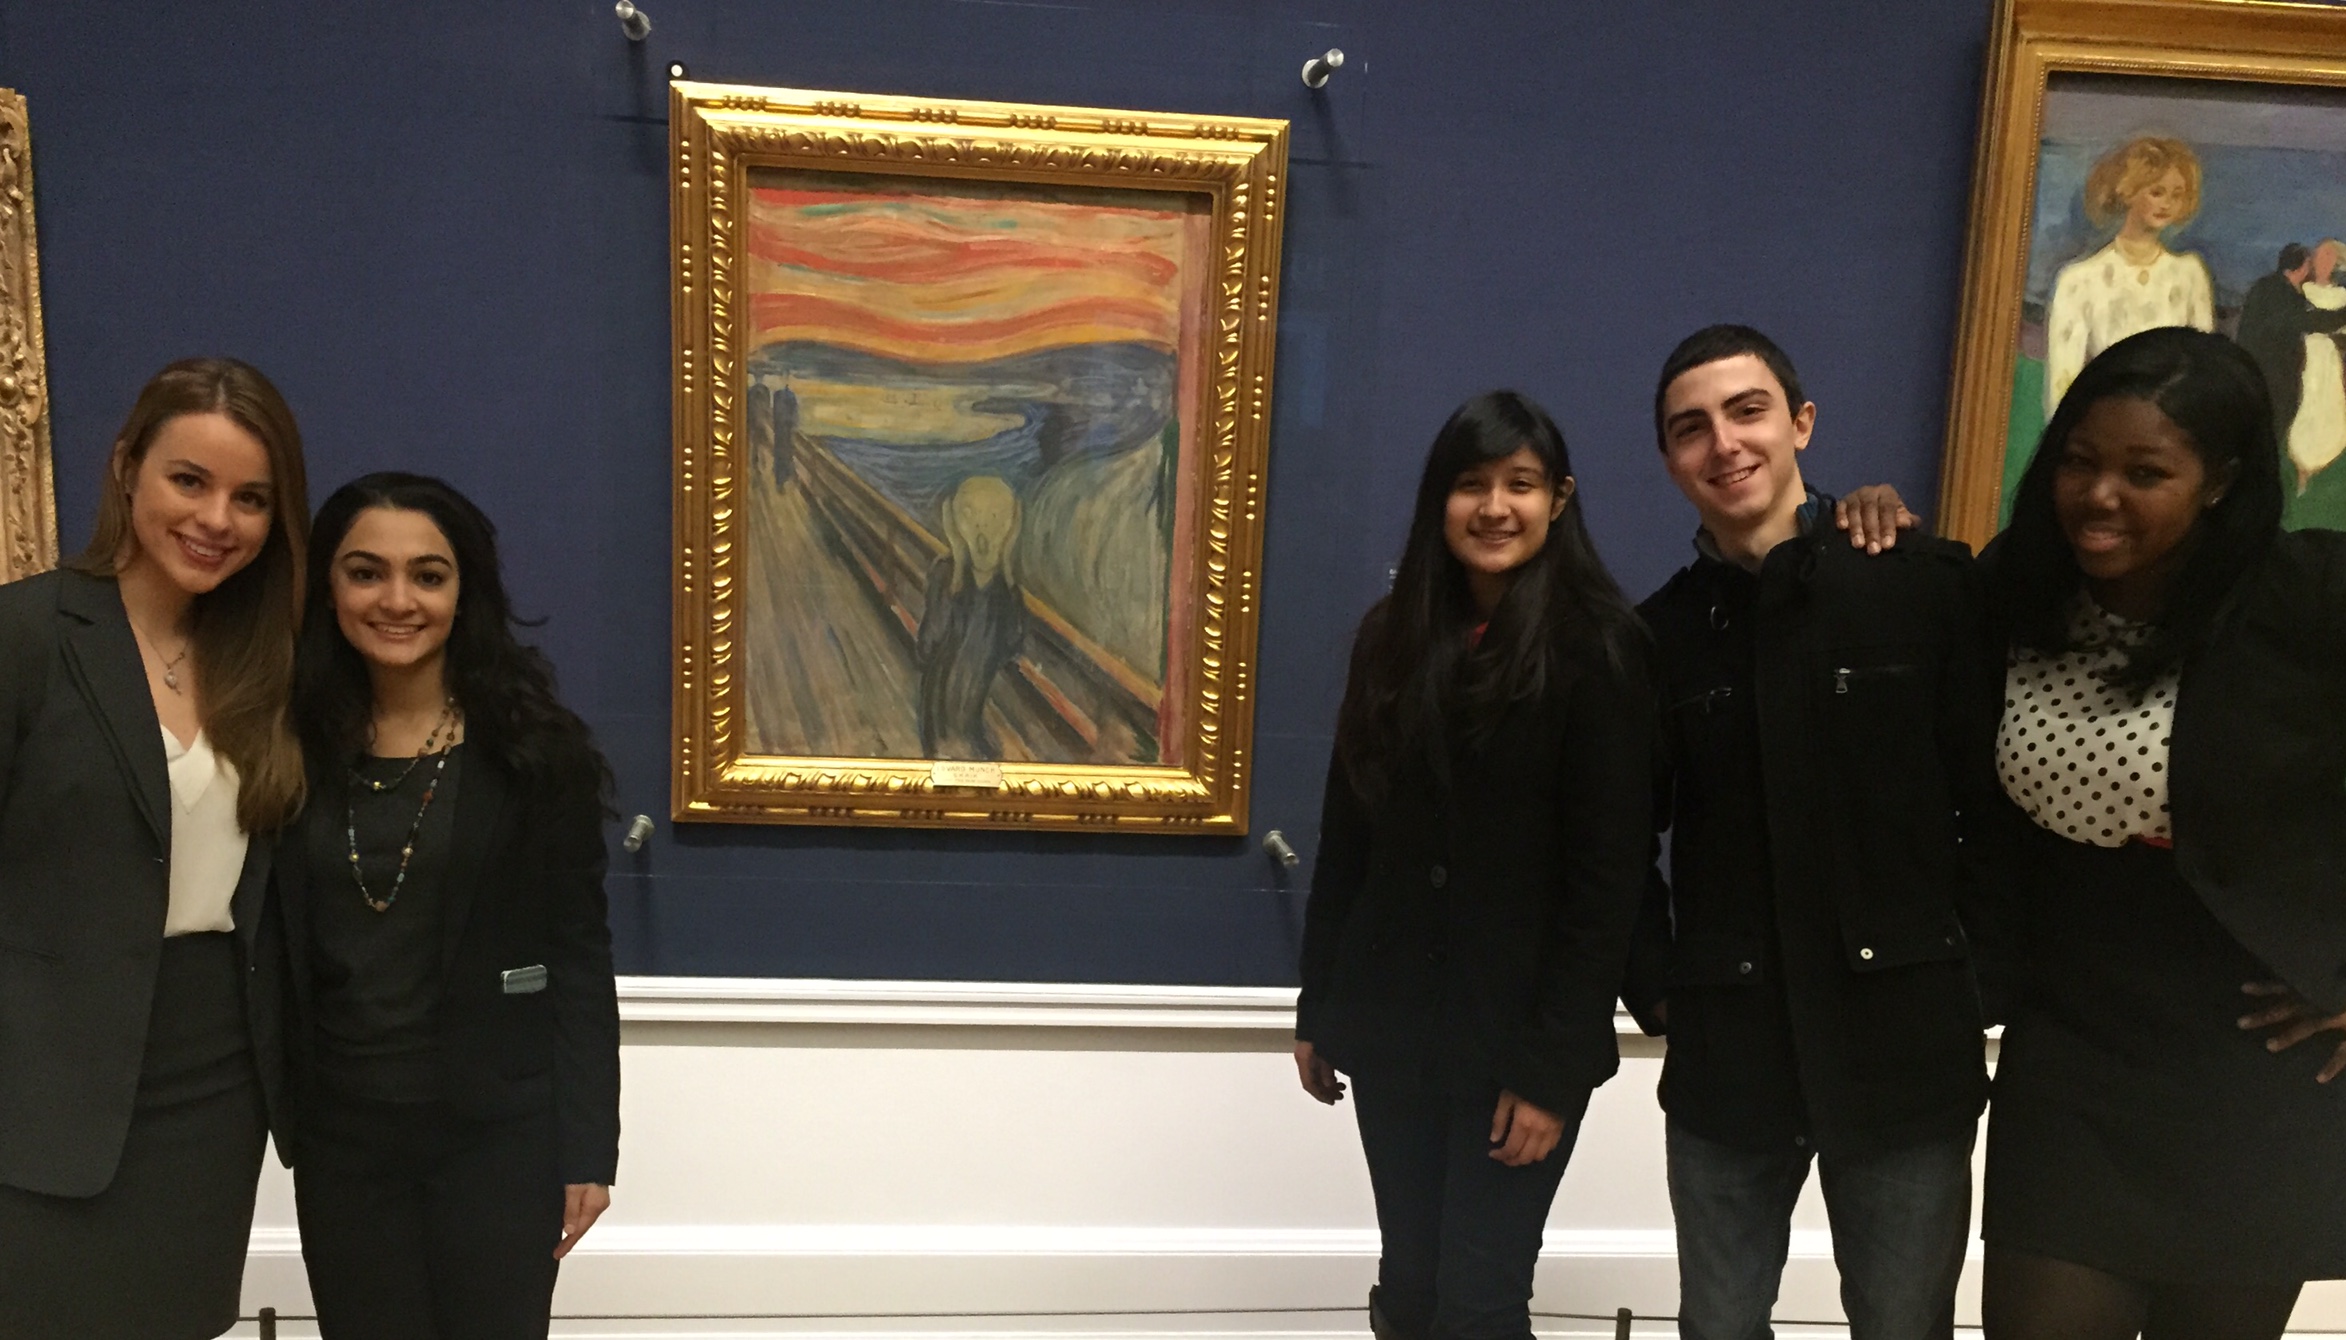 Pace University New York City Model UN students take a break from the 2015 OsloMUN conference to visit Edvard Munch's painting The Scream. Left to right: Lindita Capric '15, Priya Sakaria '17, Jennifer Diaz '16, Vato Gogsadze '15 and Shade Quailey '15.